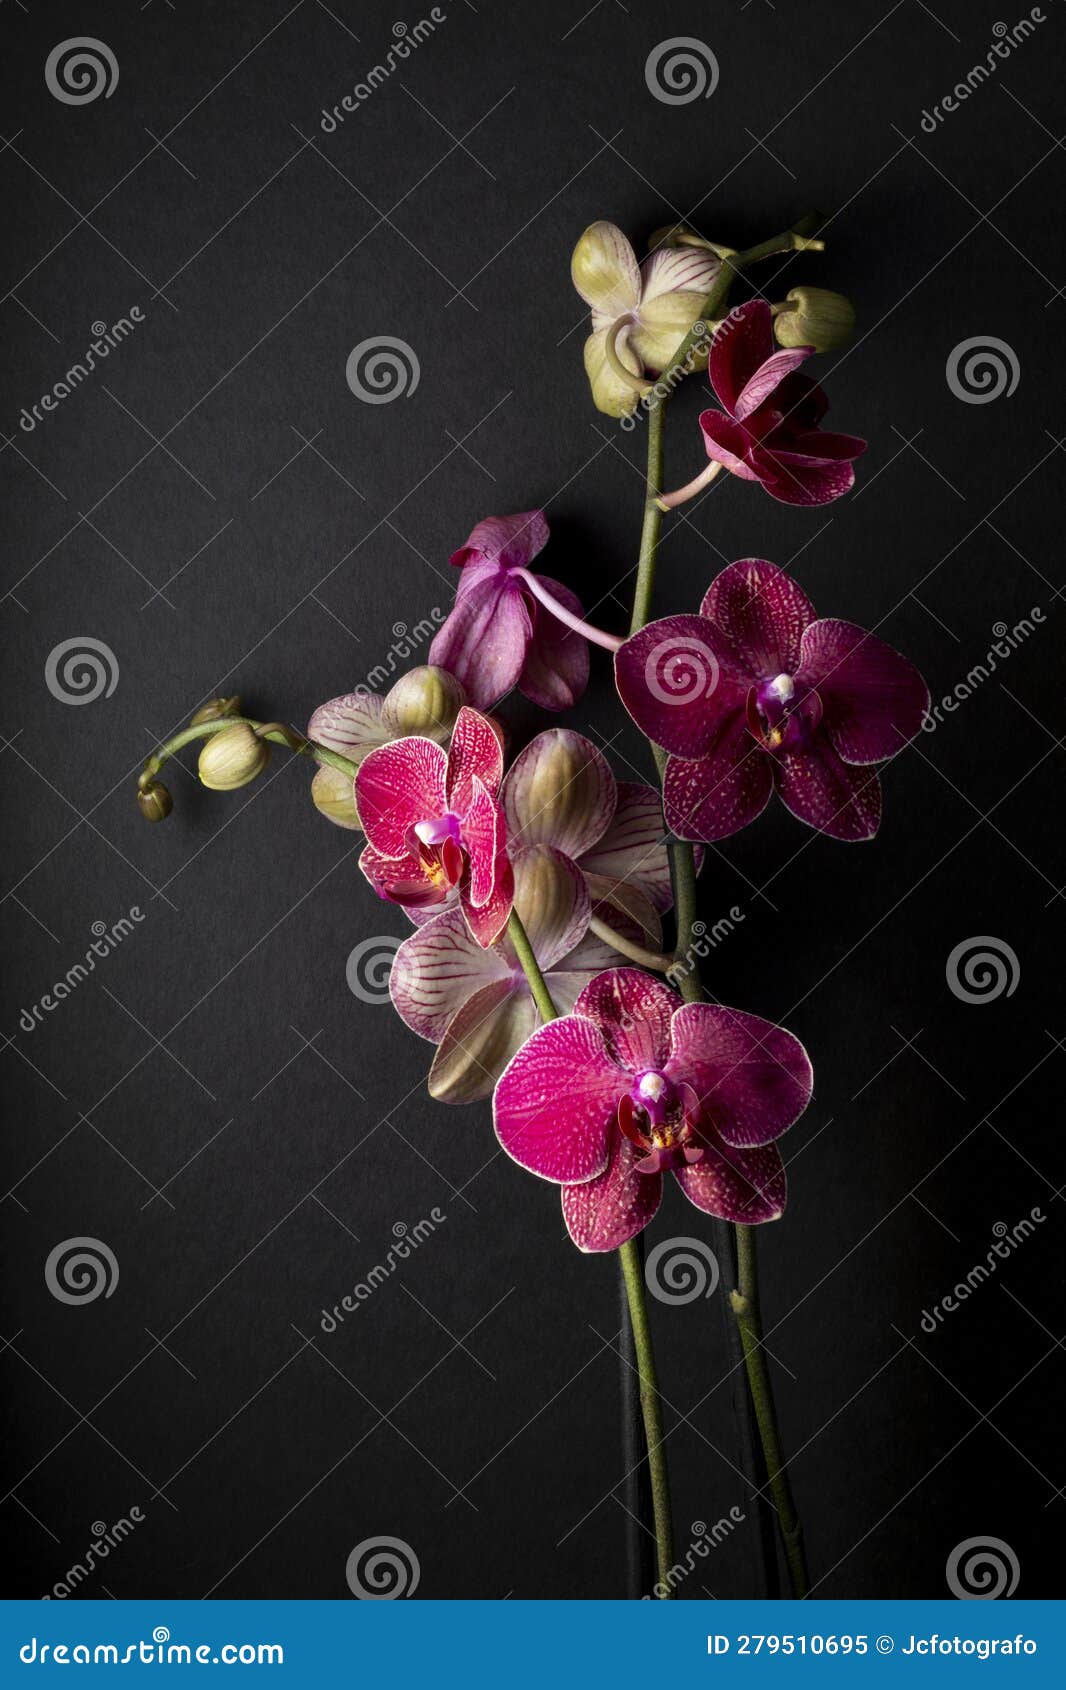 floral ornament of pink and white orchids on black background